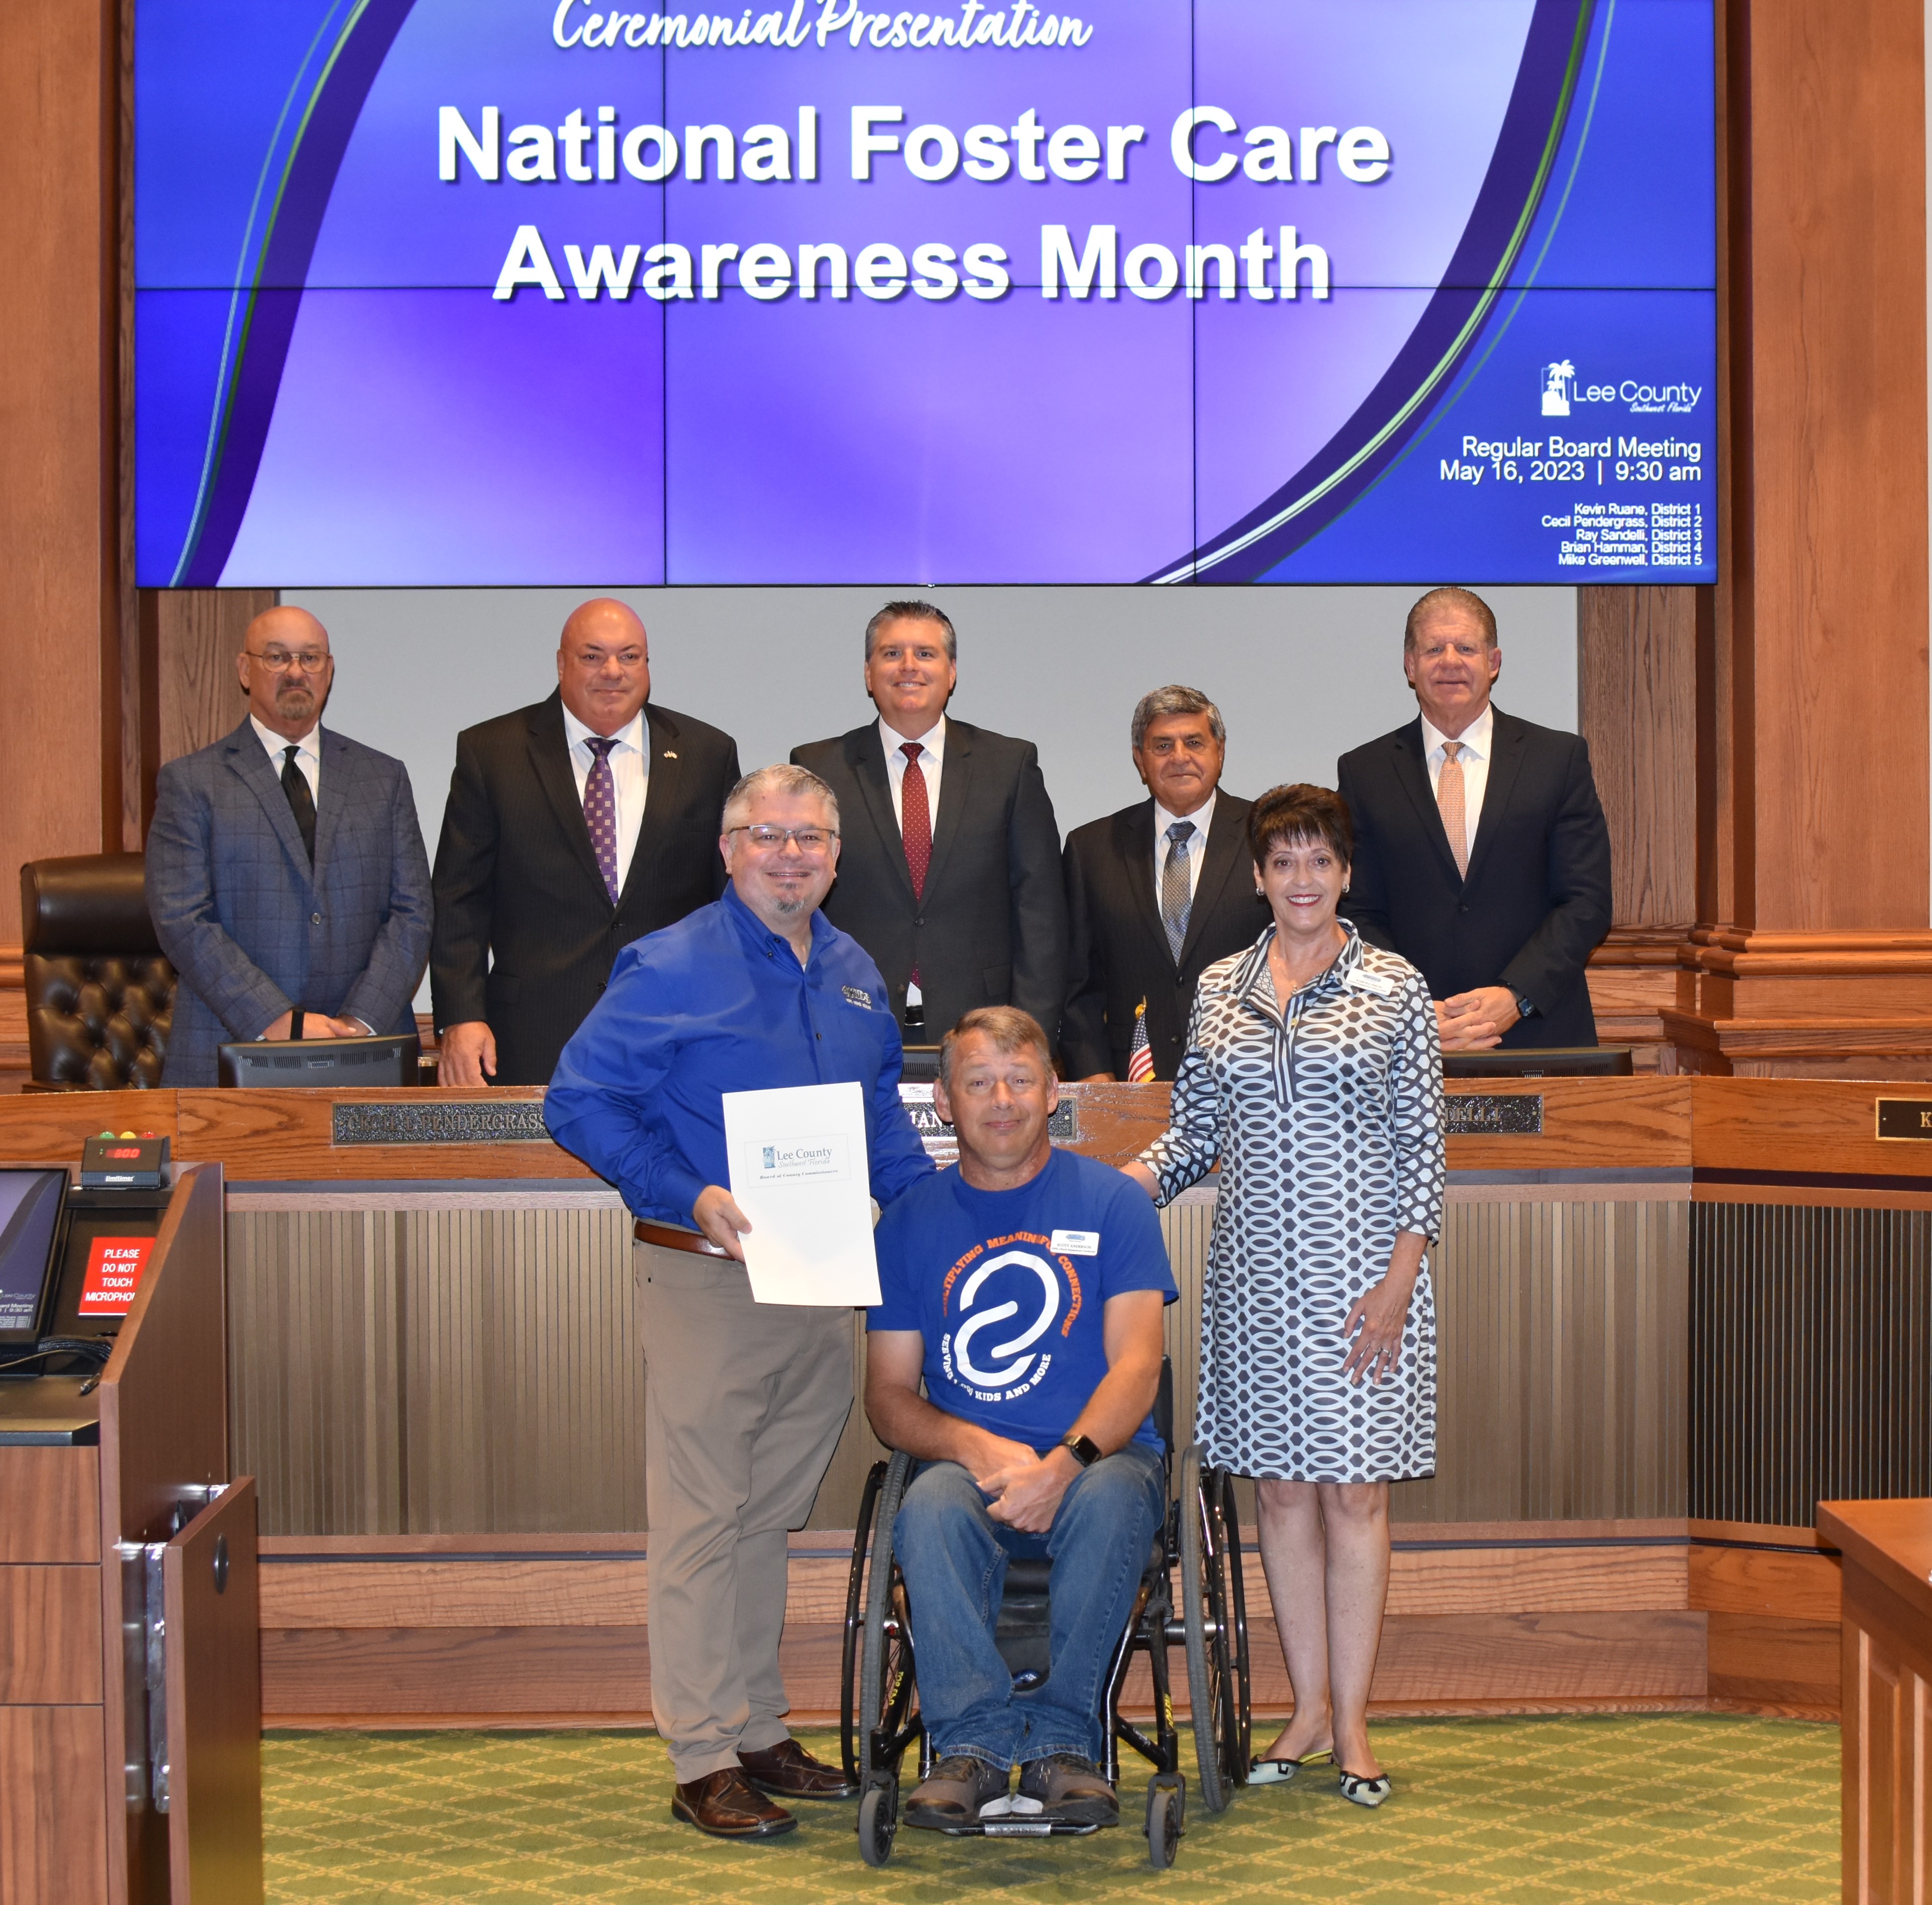 05-16-23 National Foster Care Awareness Month